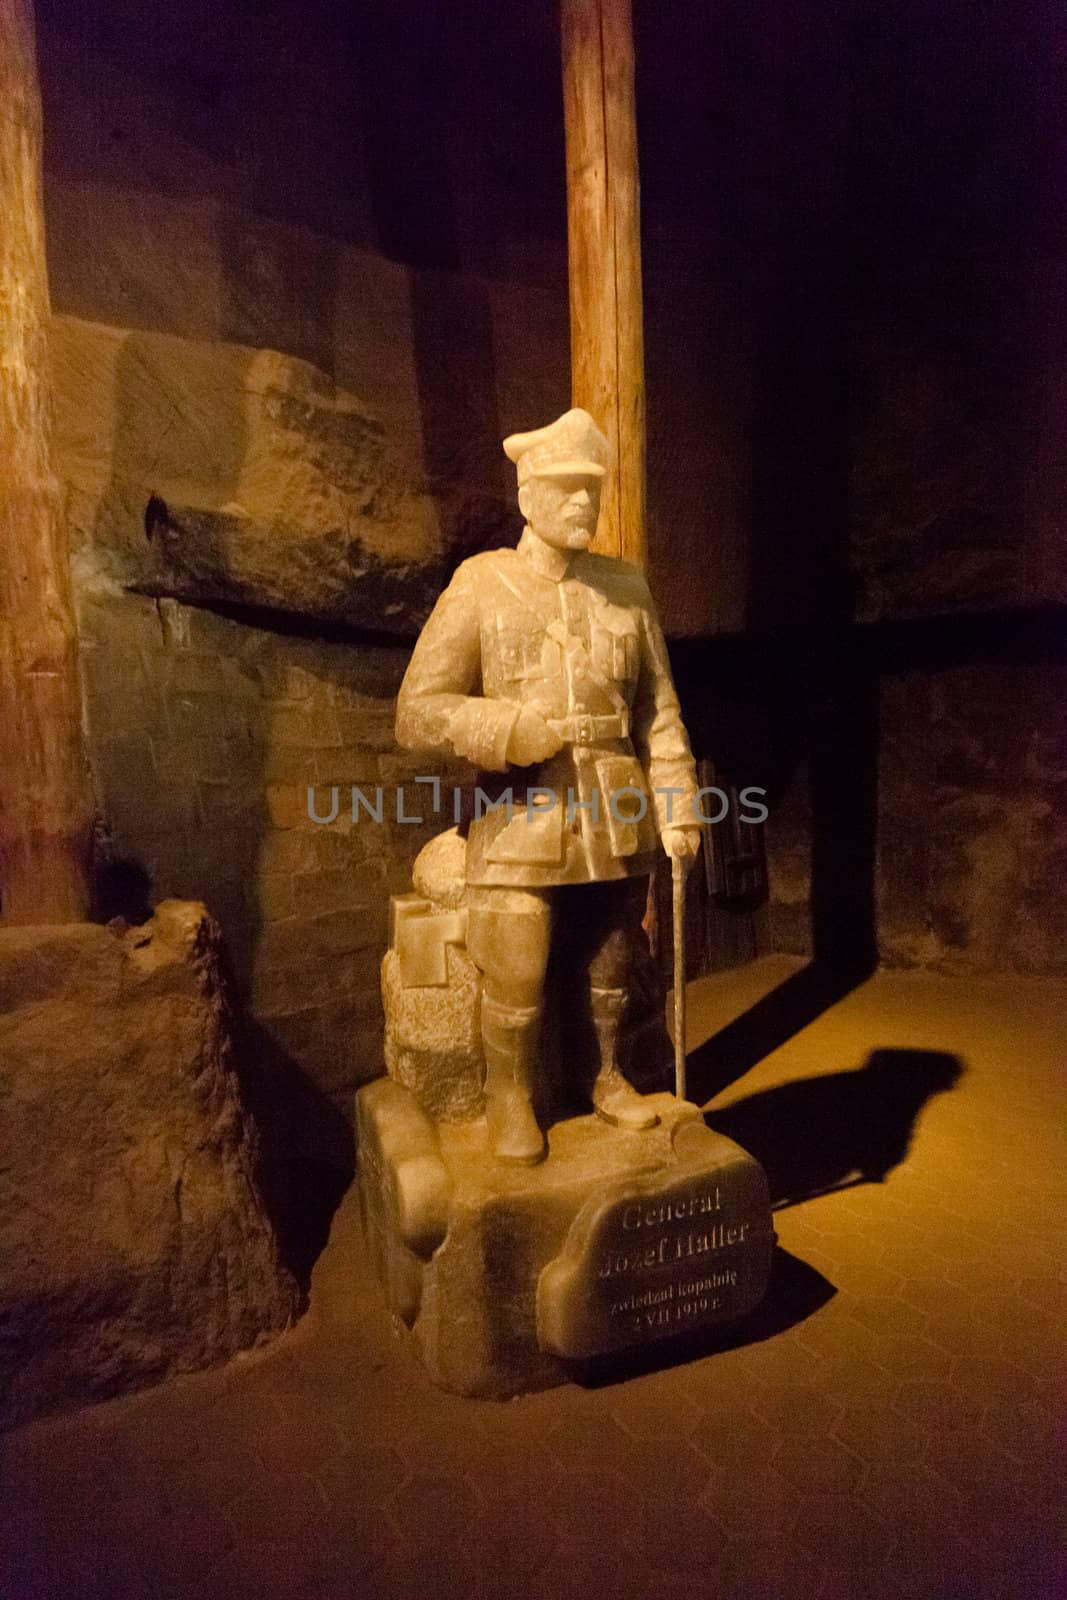 Wieliczka Salt Mine continuously produced table salt from the 13th century until 2007 as one of the world's oldest operating salt mines.